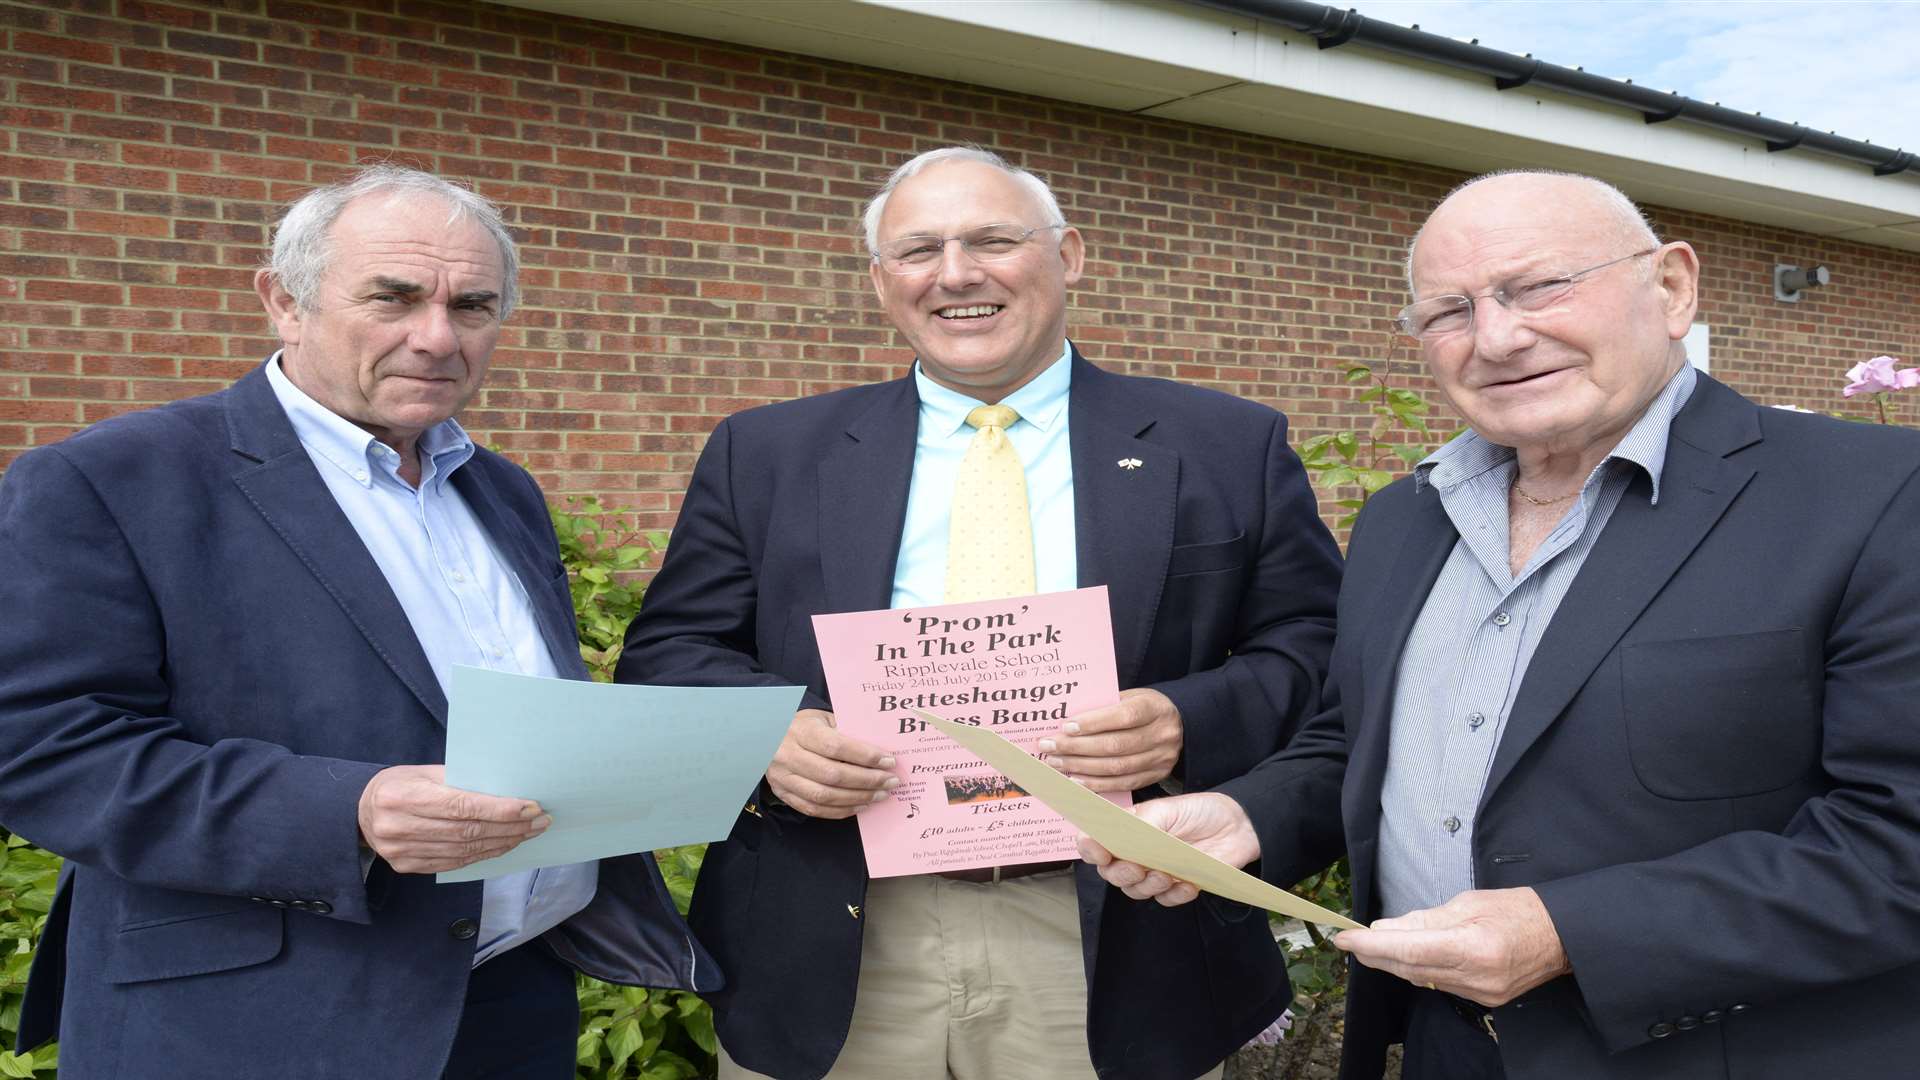 John Trickey of the Deal, Walmer and Kingsdown Carnival and Regatta Association with Chris Danican of Ripplevale School and John Goold of the Betteshanger Colliery Band